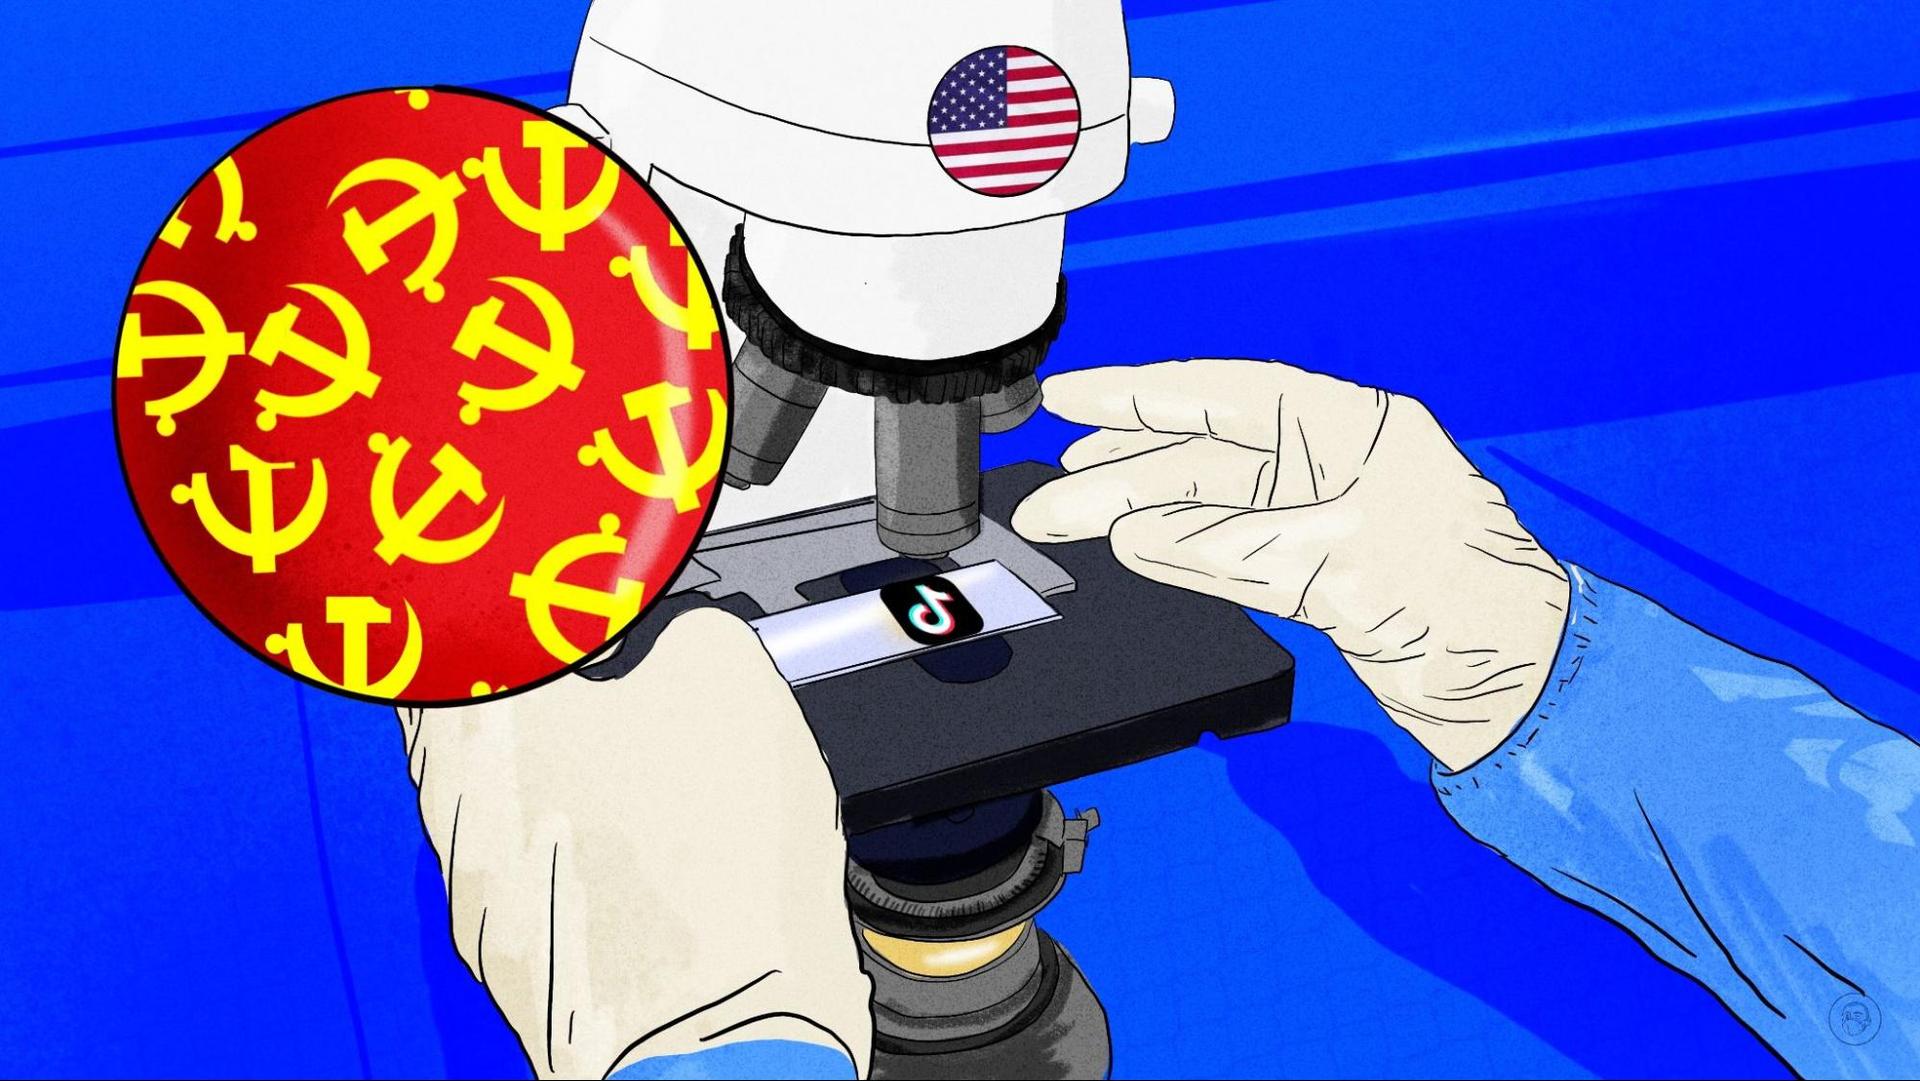 An illustration by Alex Santafe depicting a person looking TikTok under the microscope with a magnifyied version showing the Comunist Party logo (Hammer and Sickle)